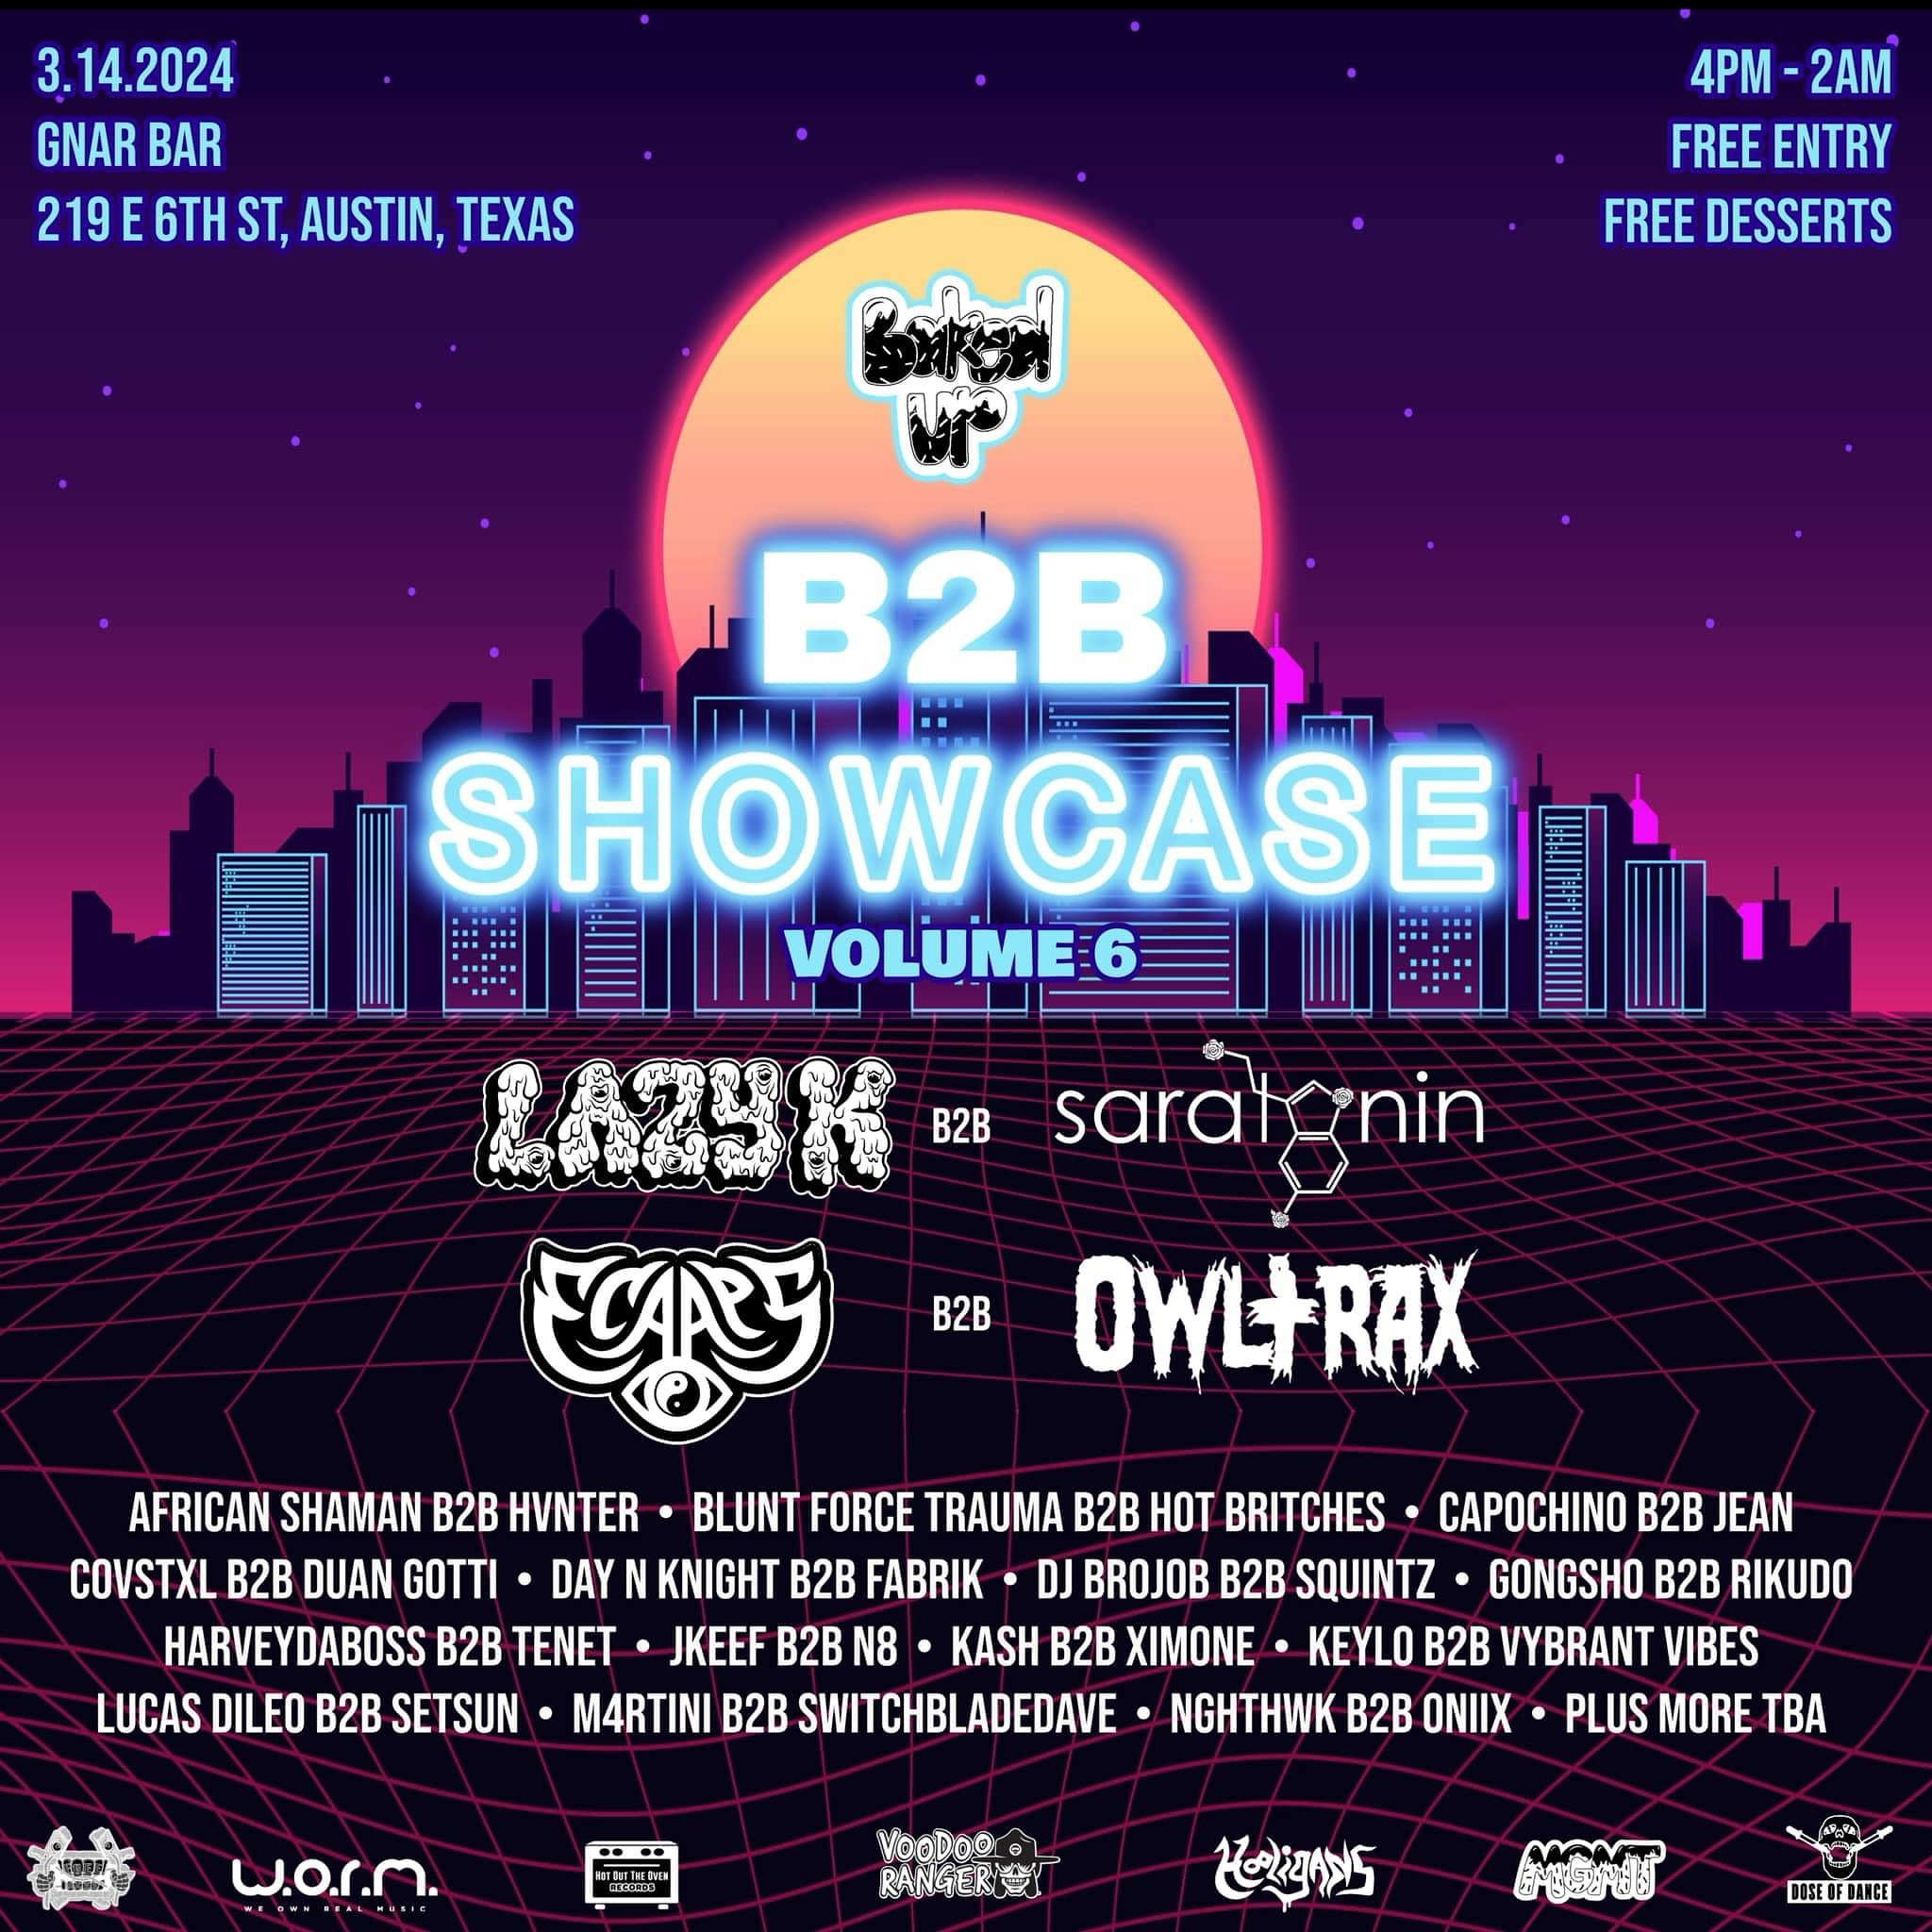 Show announcement!!! <3

Sooo juiced to be throwing down with the homie @madebykeylo for another fire B2B Showcase during SXSW 🥳

Join us for the fun at @gnarbaratx from 4pm-2am 🔥

See you there 😉

#bakedup #ATX #sxsw #sxsw2024 #austintexas #b2b